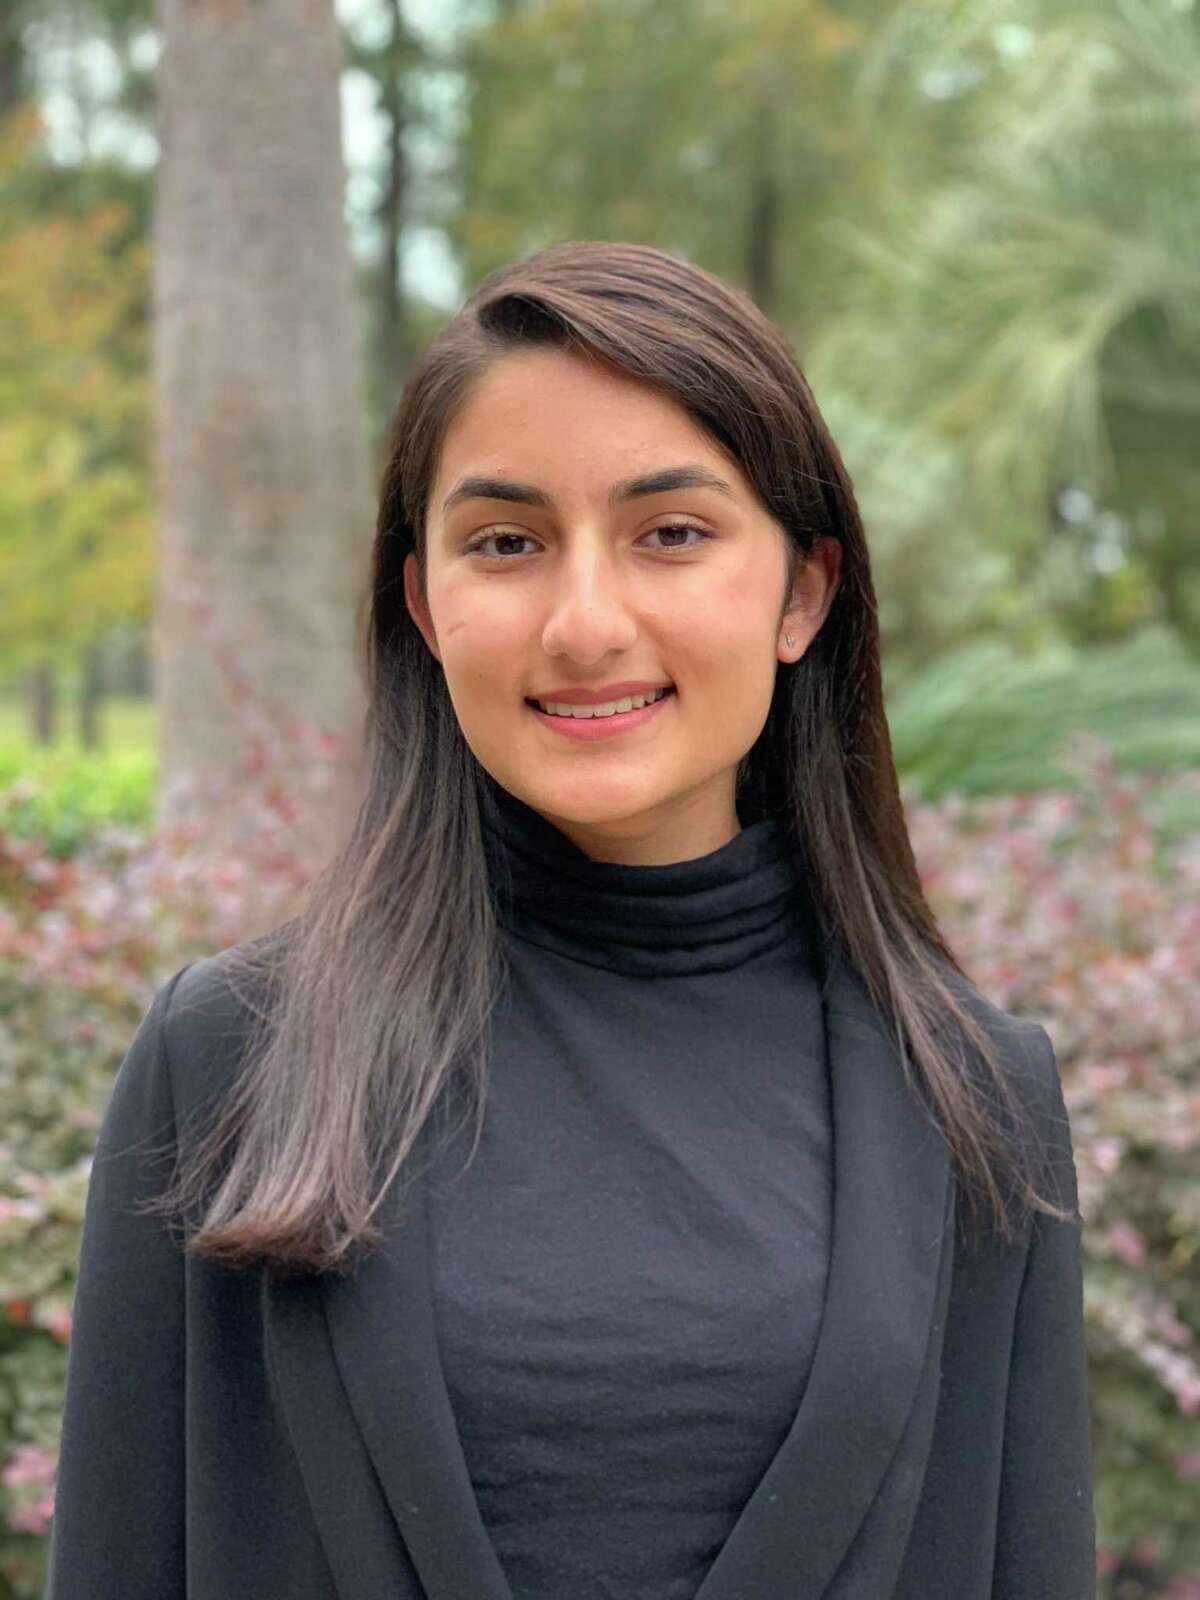 Grand Oaks High School sophomore Yasmeen Khan was recently chosen as a National YoungArts Foundation Finalist for her short story writing and will be attending National YoungArts Week in Florida in January.